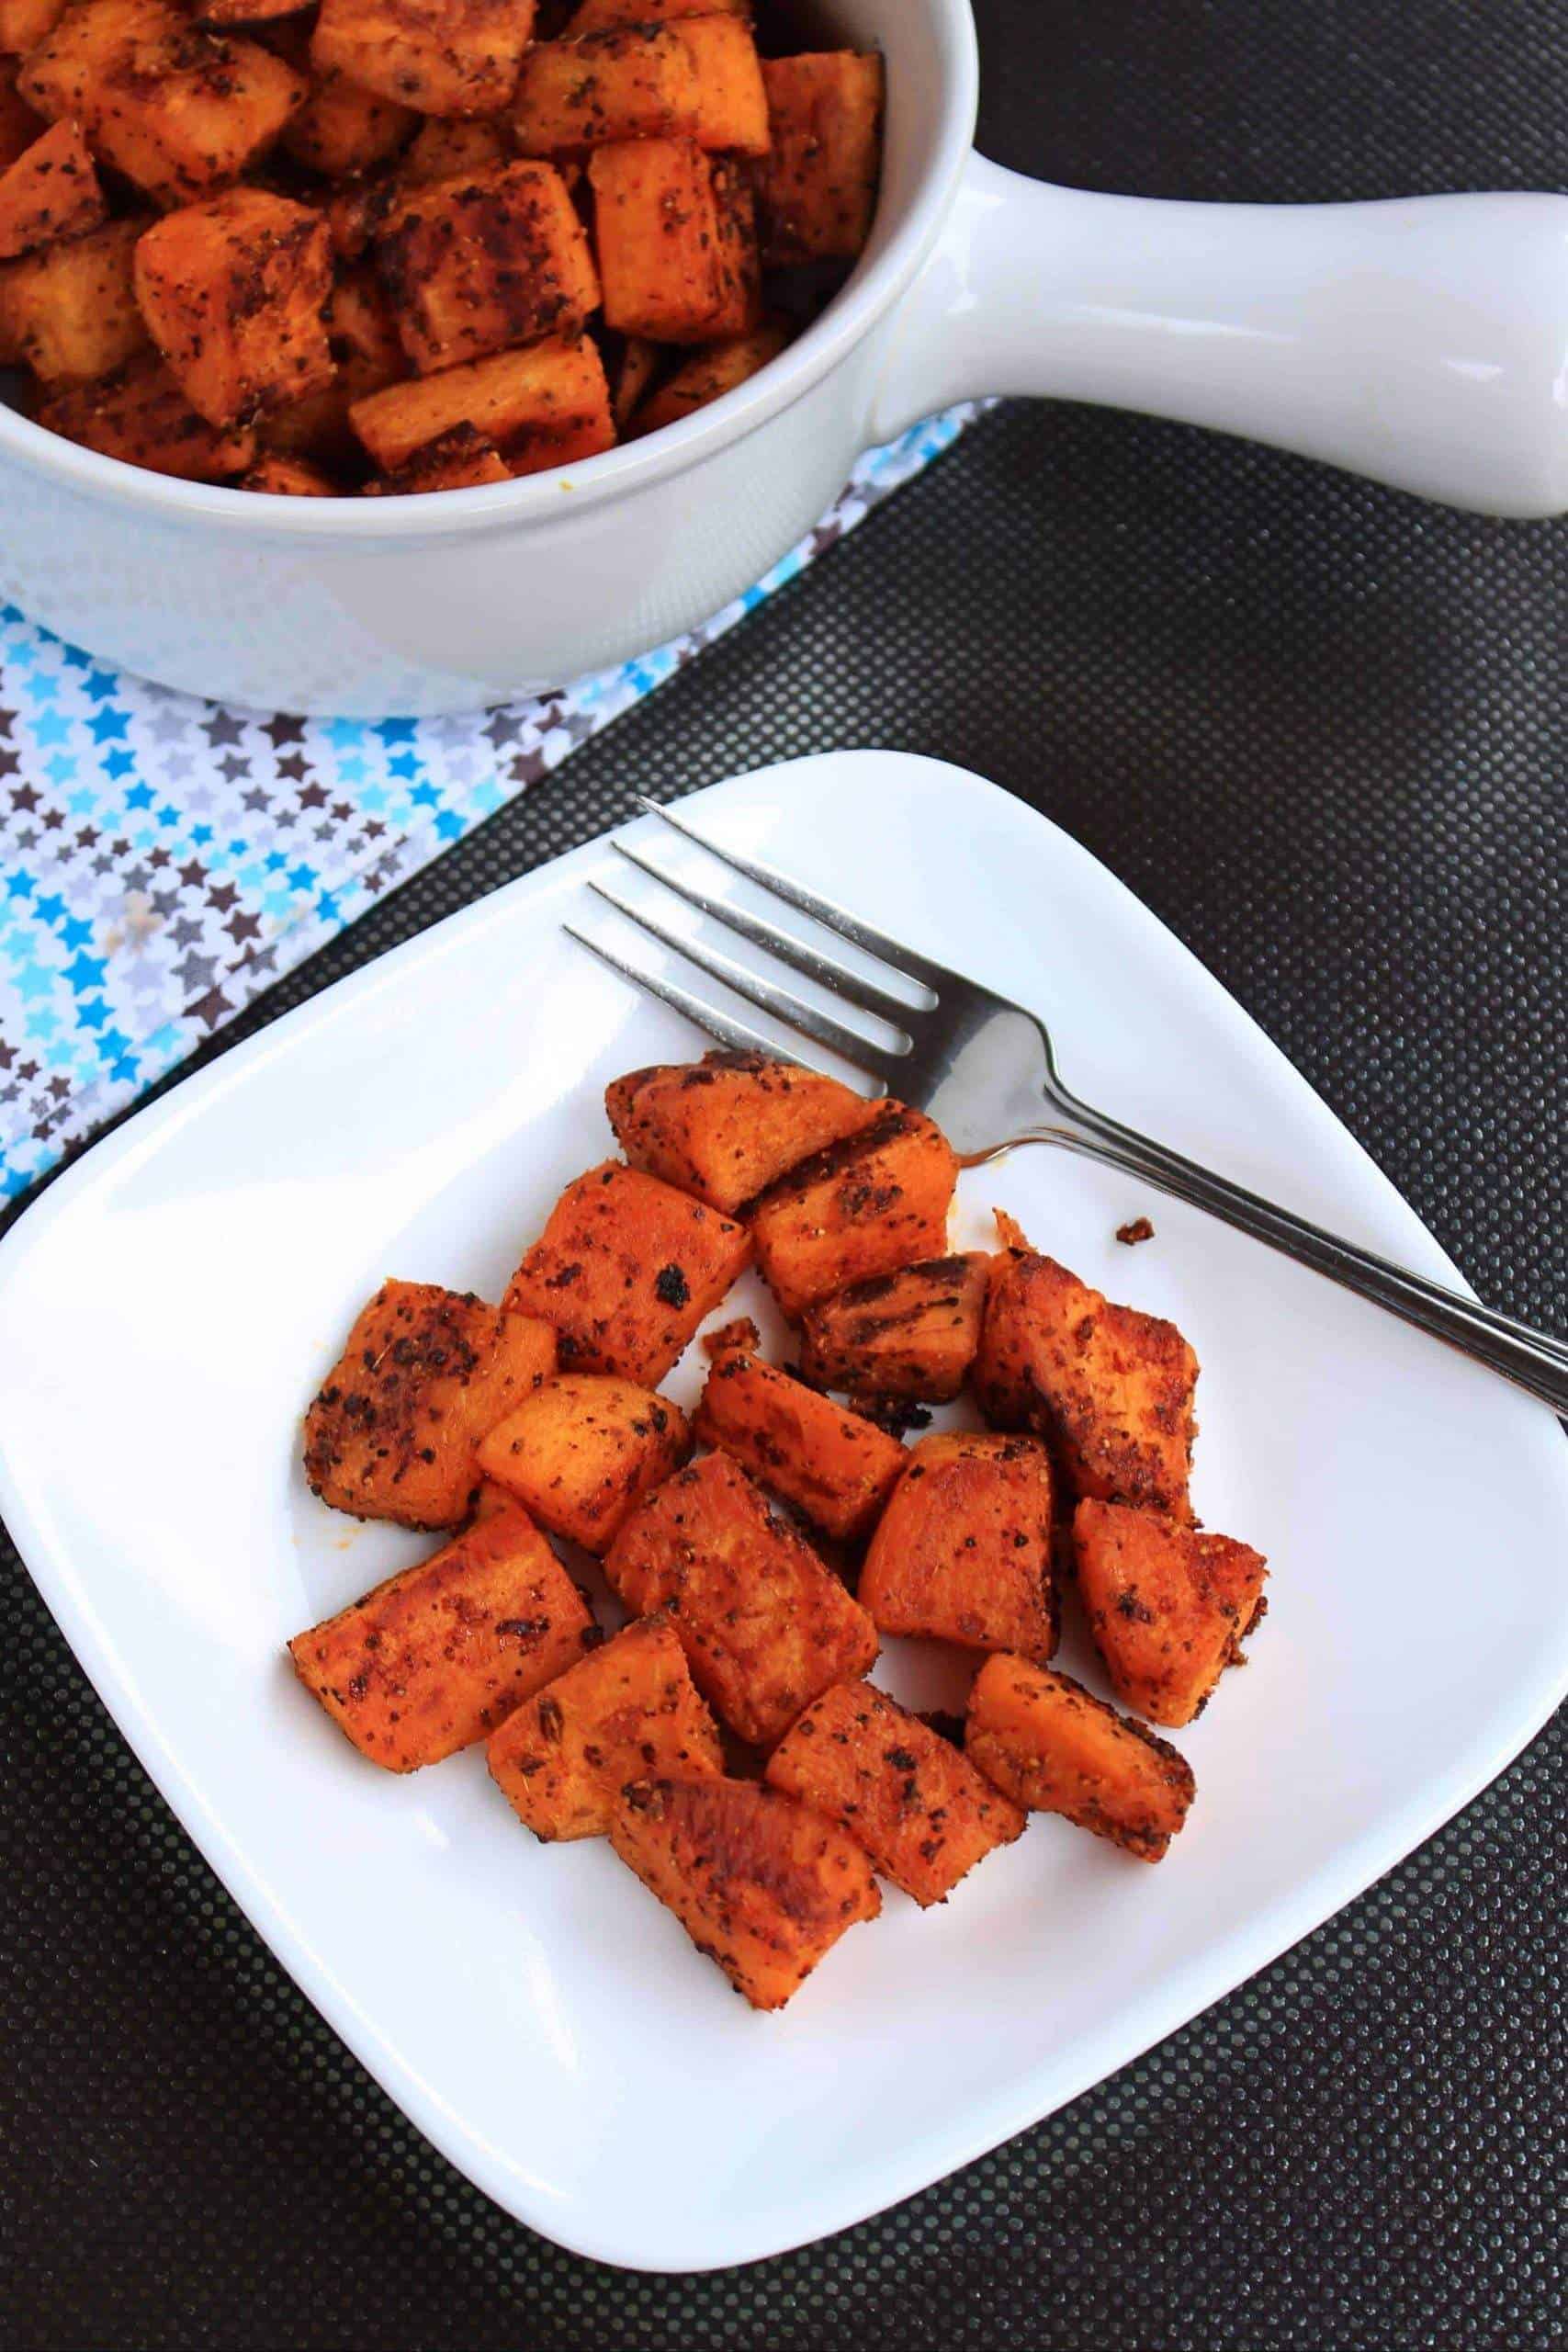 Roasted Sweet Potatoes in a Plate with Spoon.